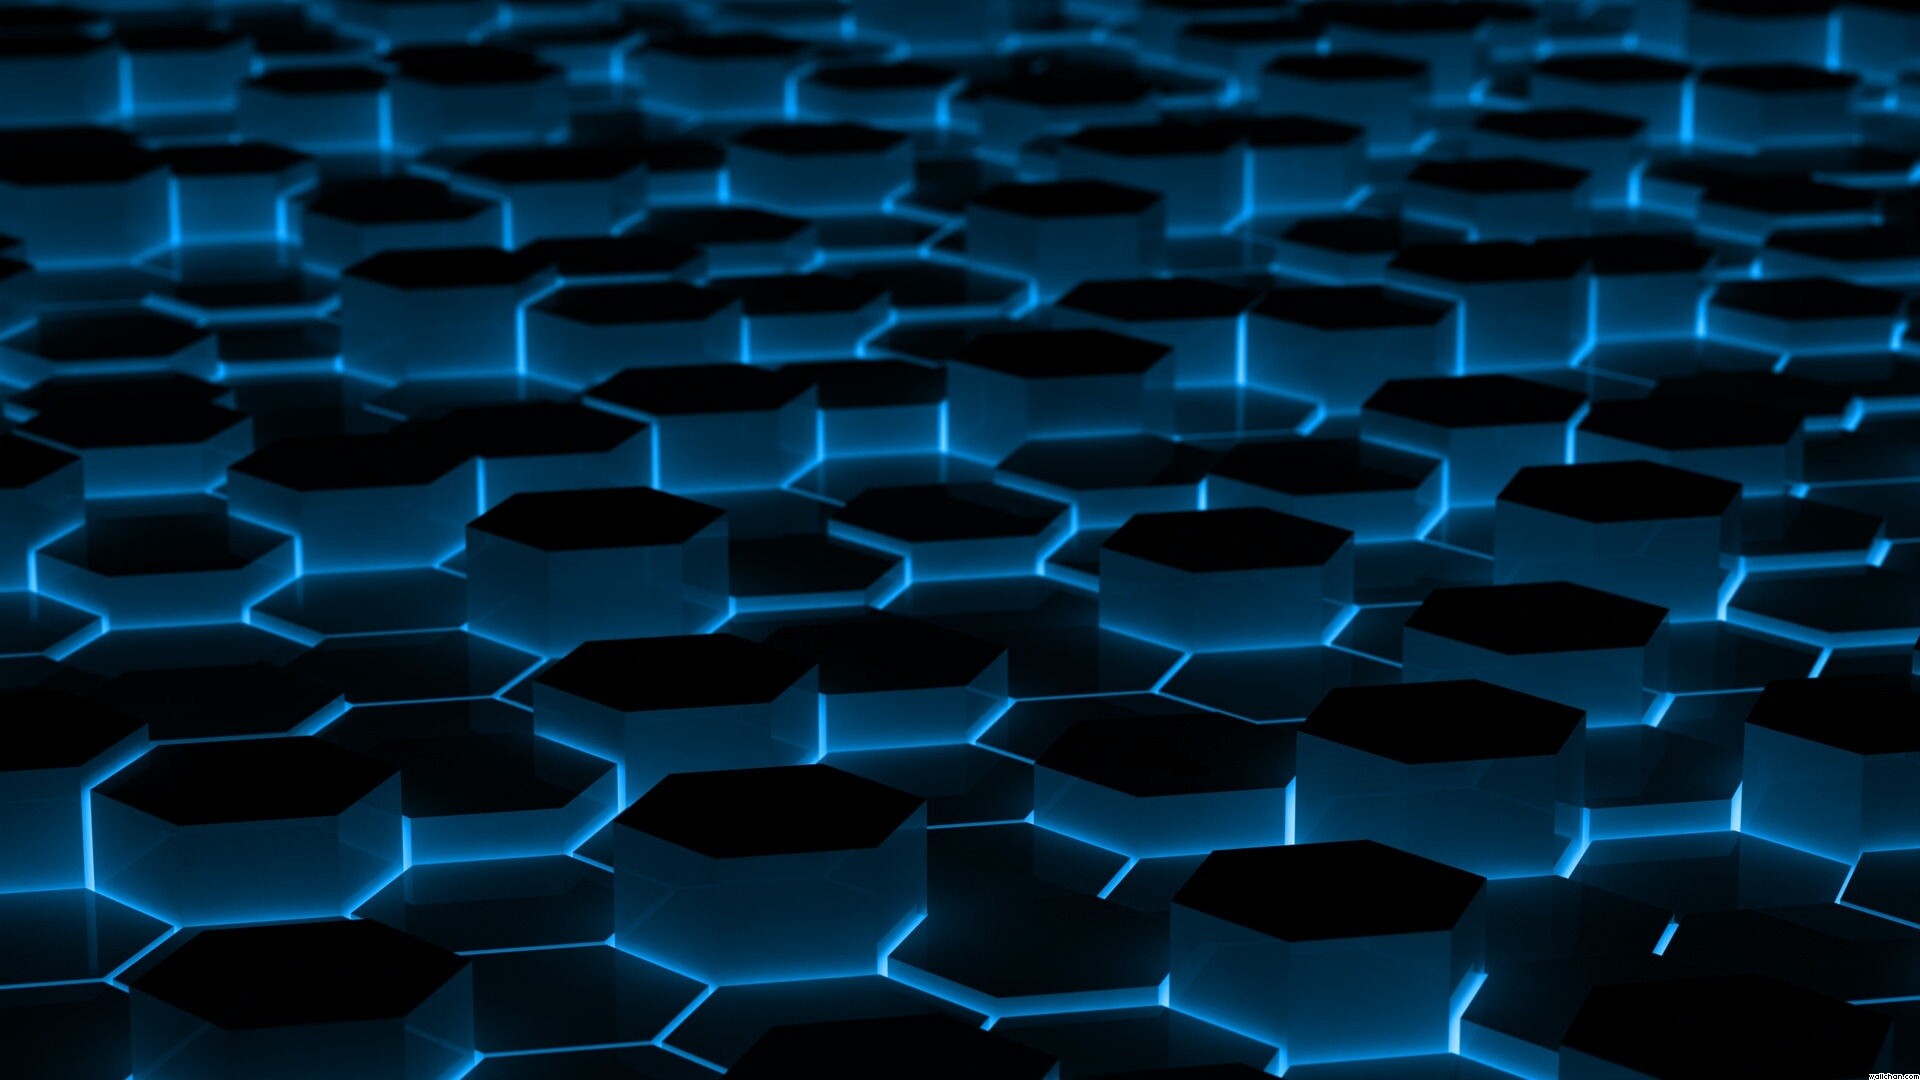 Geometric Abstract: Three-dimensional shapes, Edges, Obtuse angles. 1920x1080 Full HD Background.